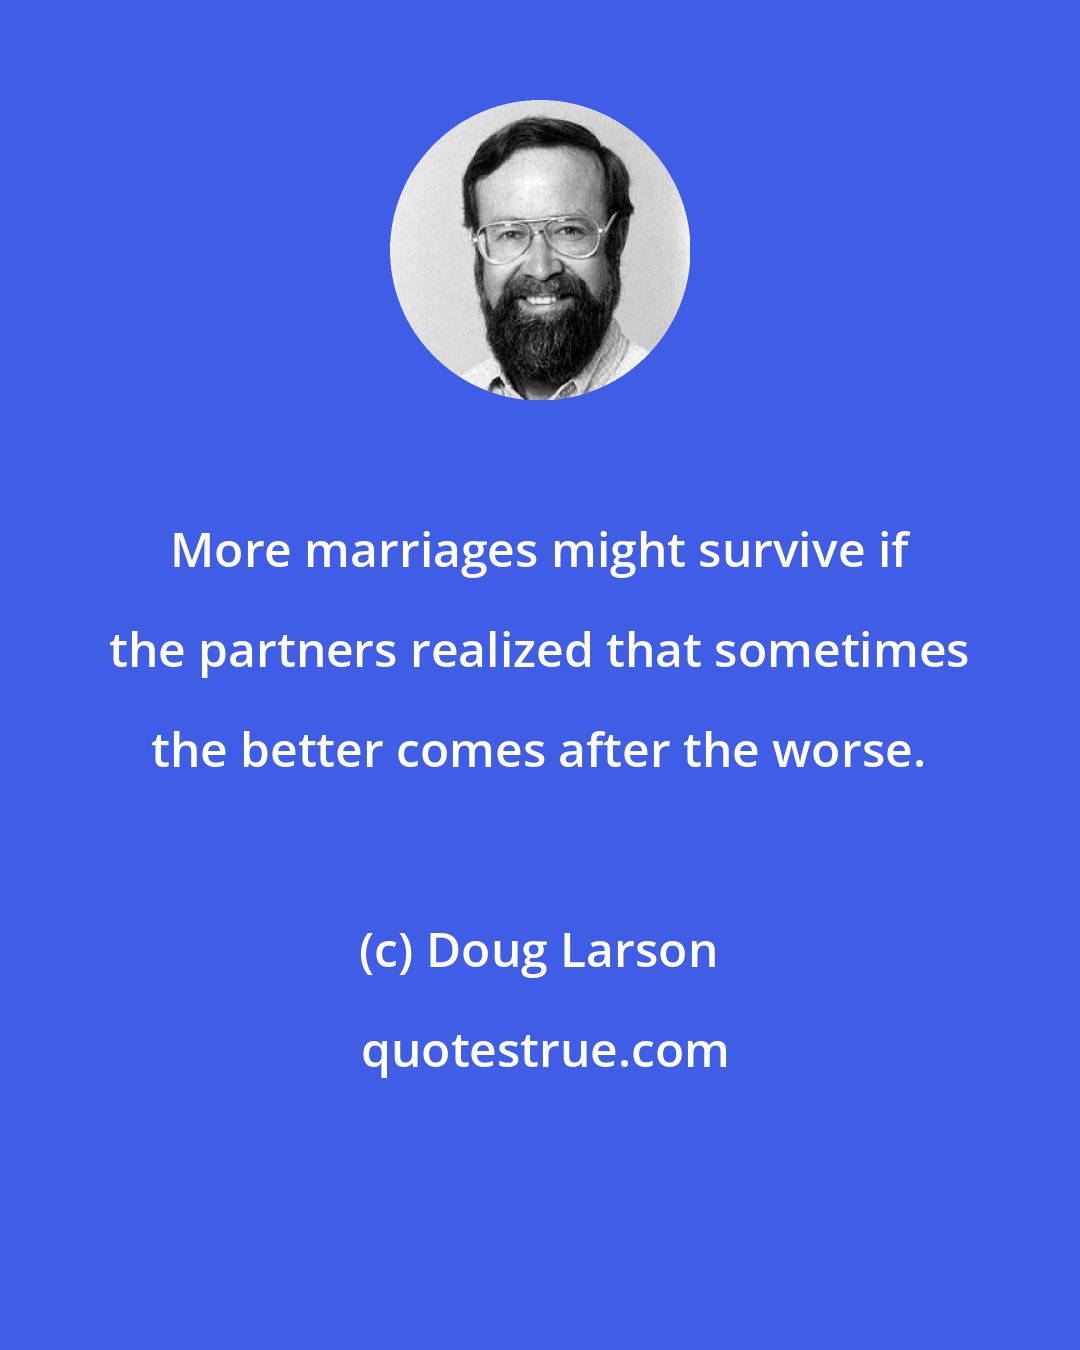 Doug Larson: More marriages might survive if the partners realized that sometimes the better comes after the worse.